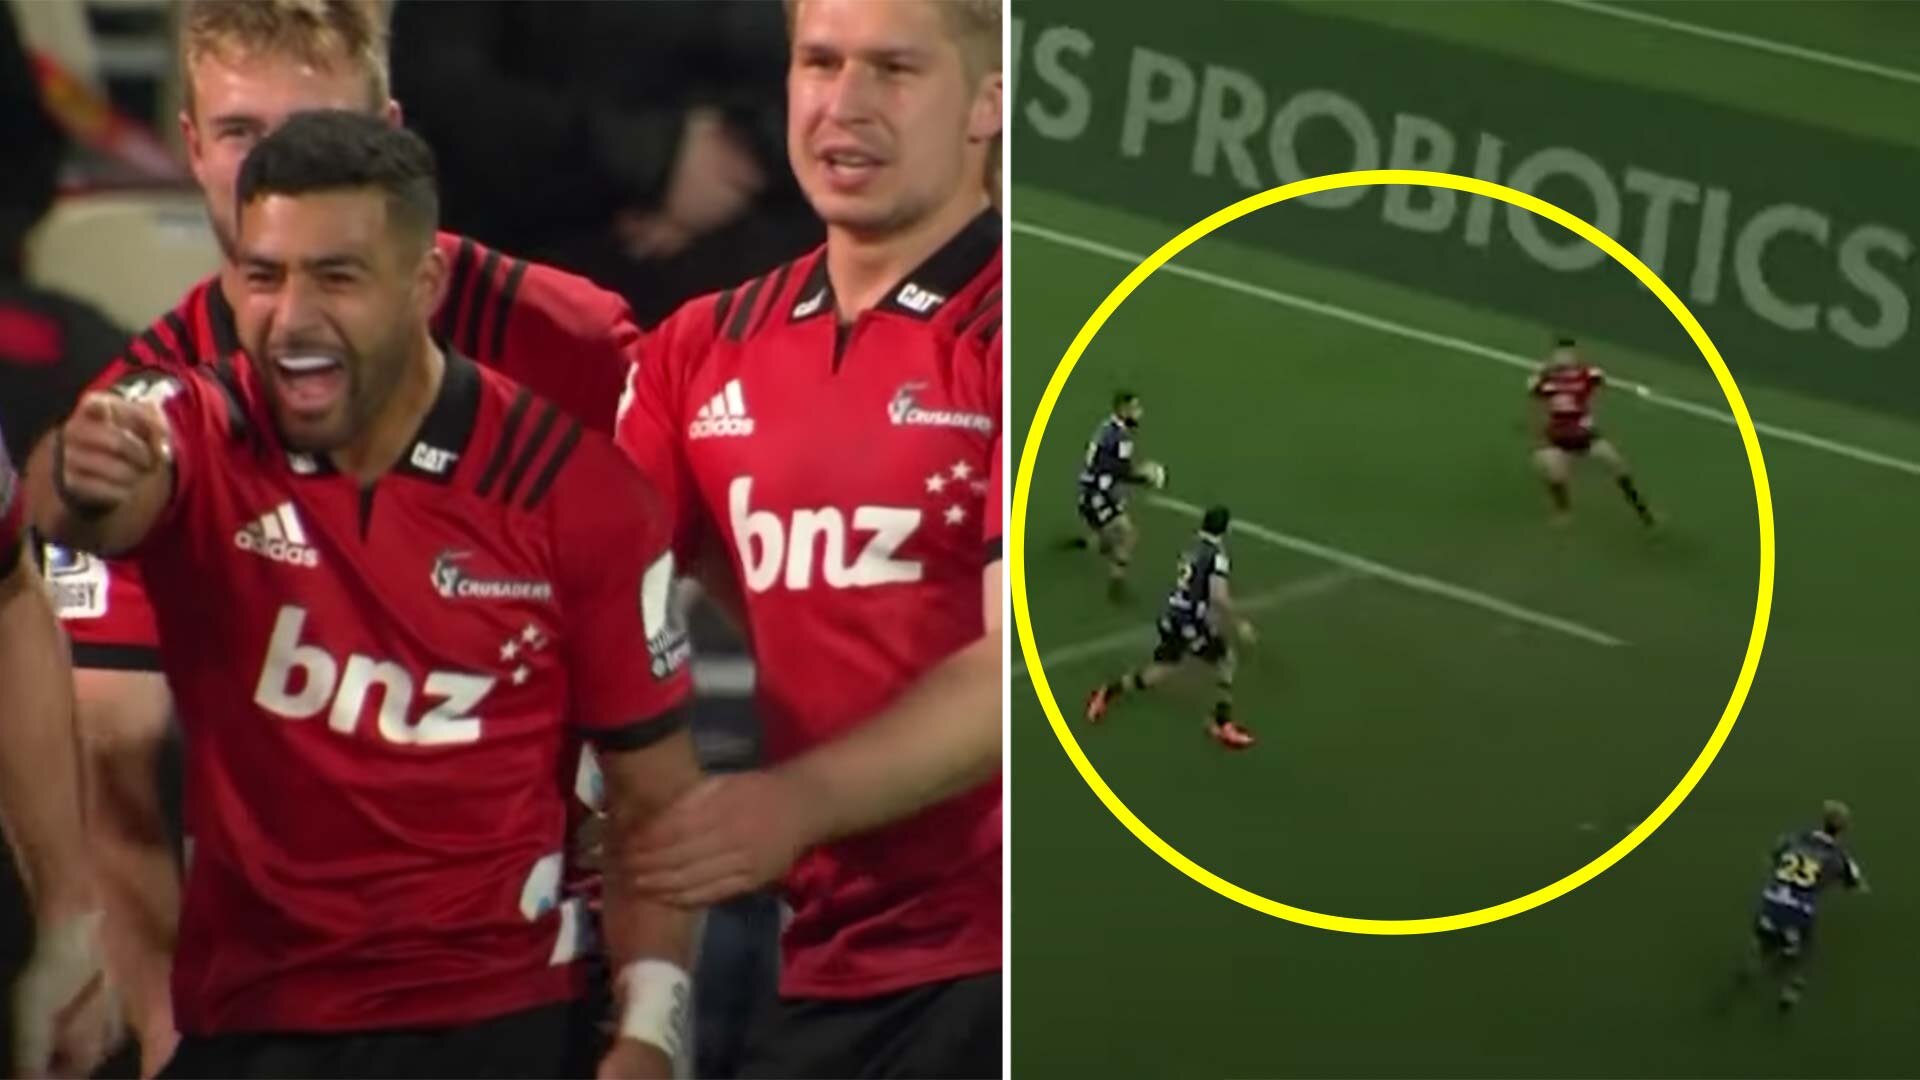 The moment Richie Mo'unga convinced everyone that he is the best fly half in the World